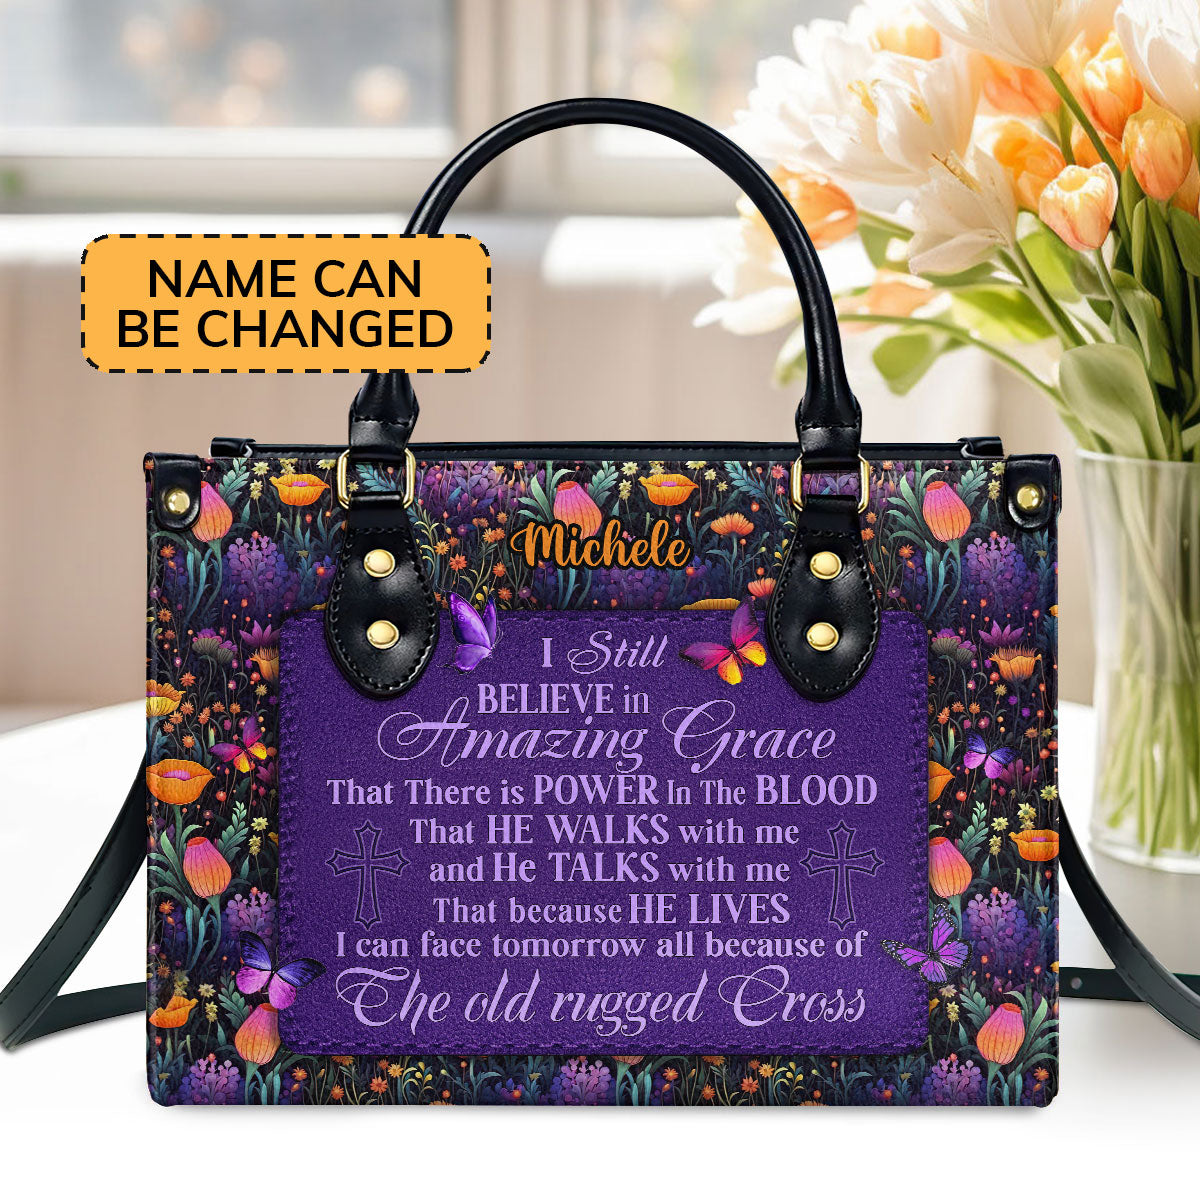 I Still Believe In Amazing Grace  Personalized Leather Handbag With Zipper - Inspirational Gift Christian Ladies